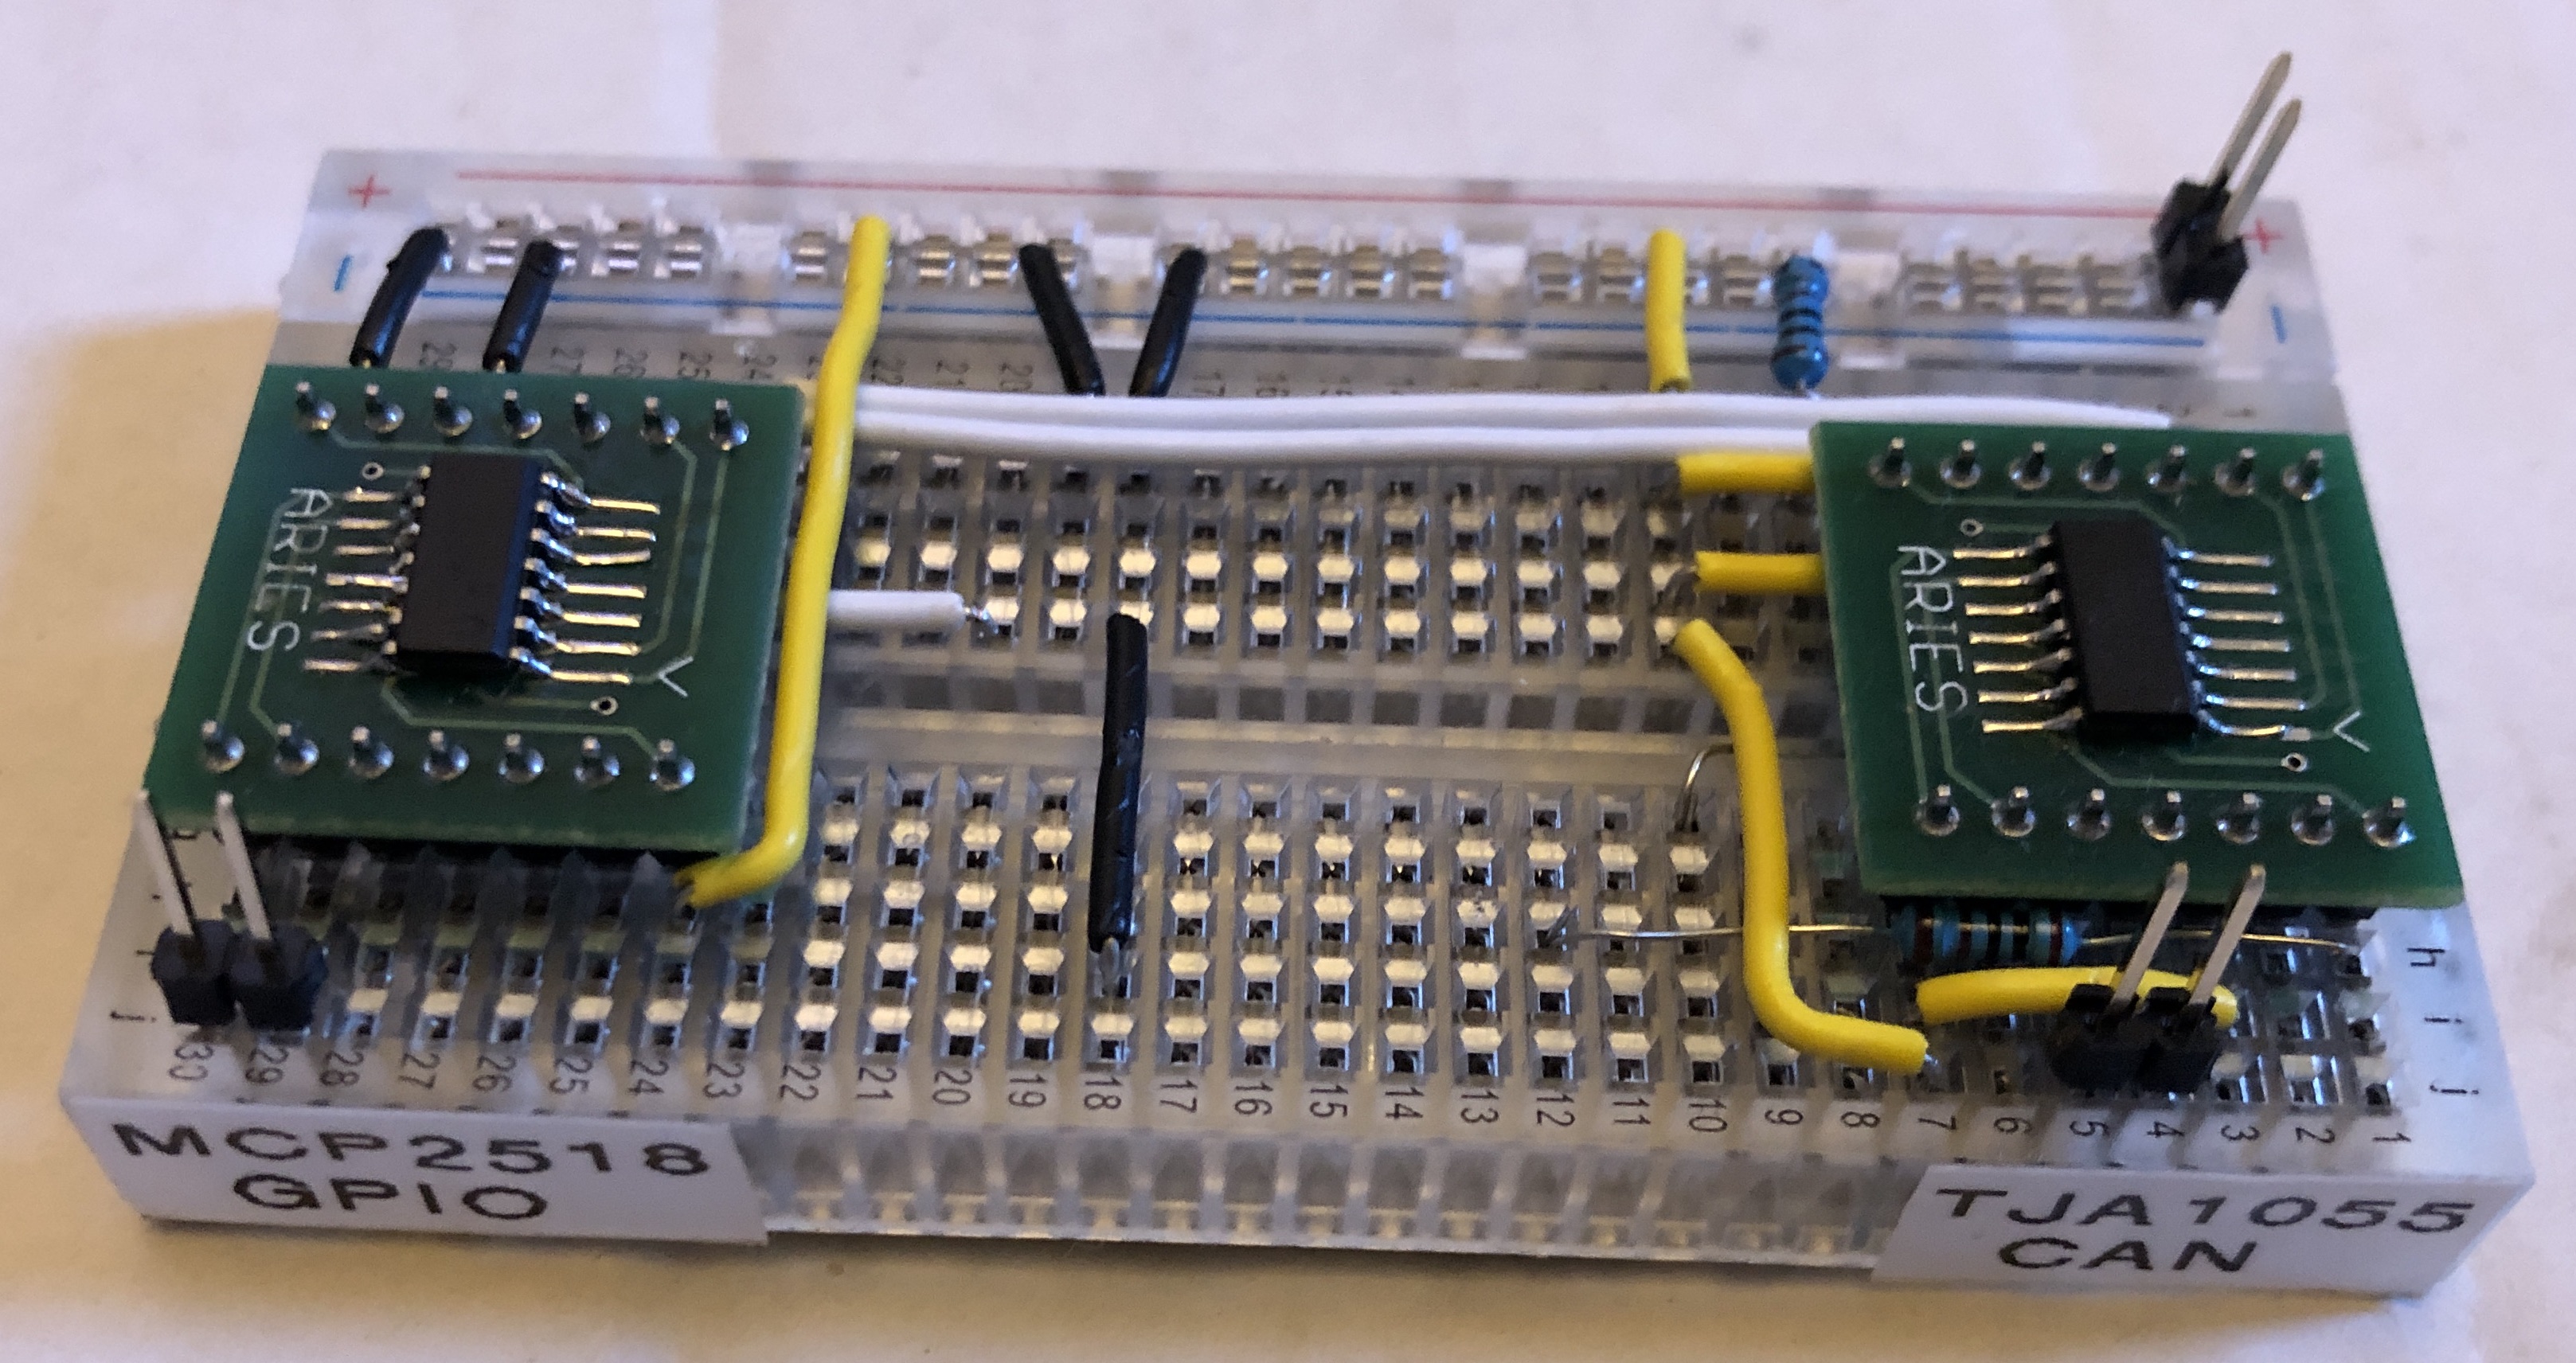 CAN-bus wiring on bread board